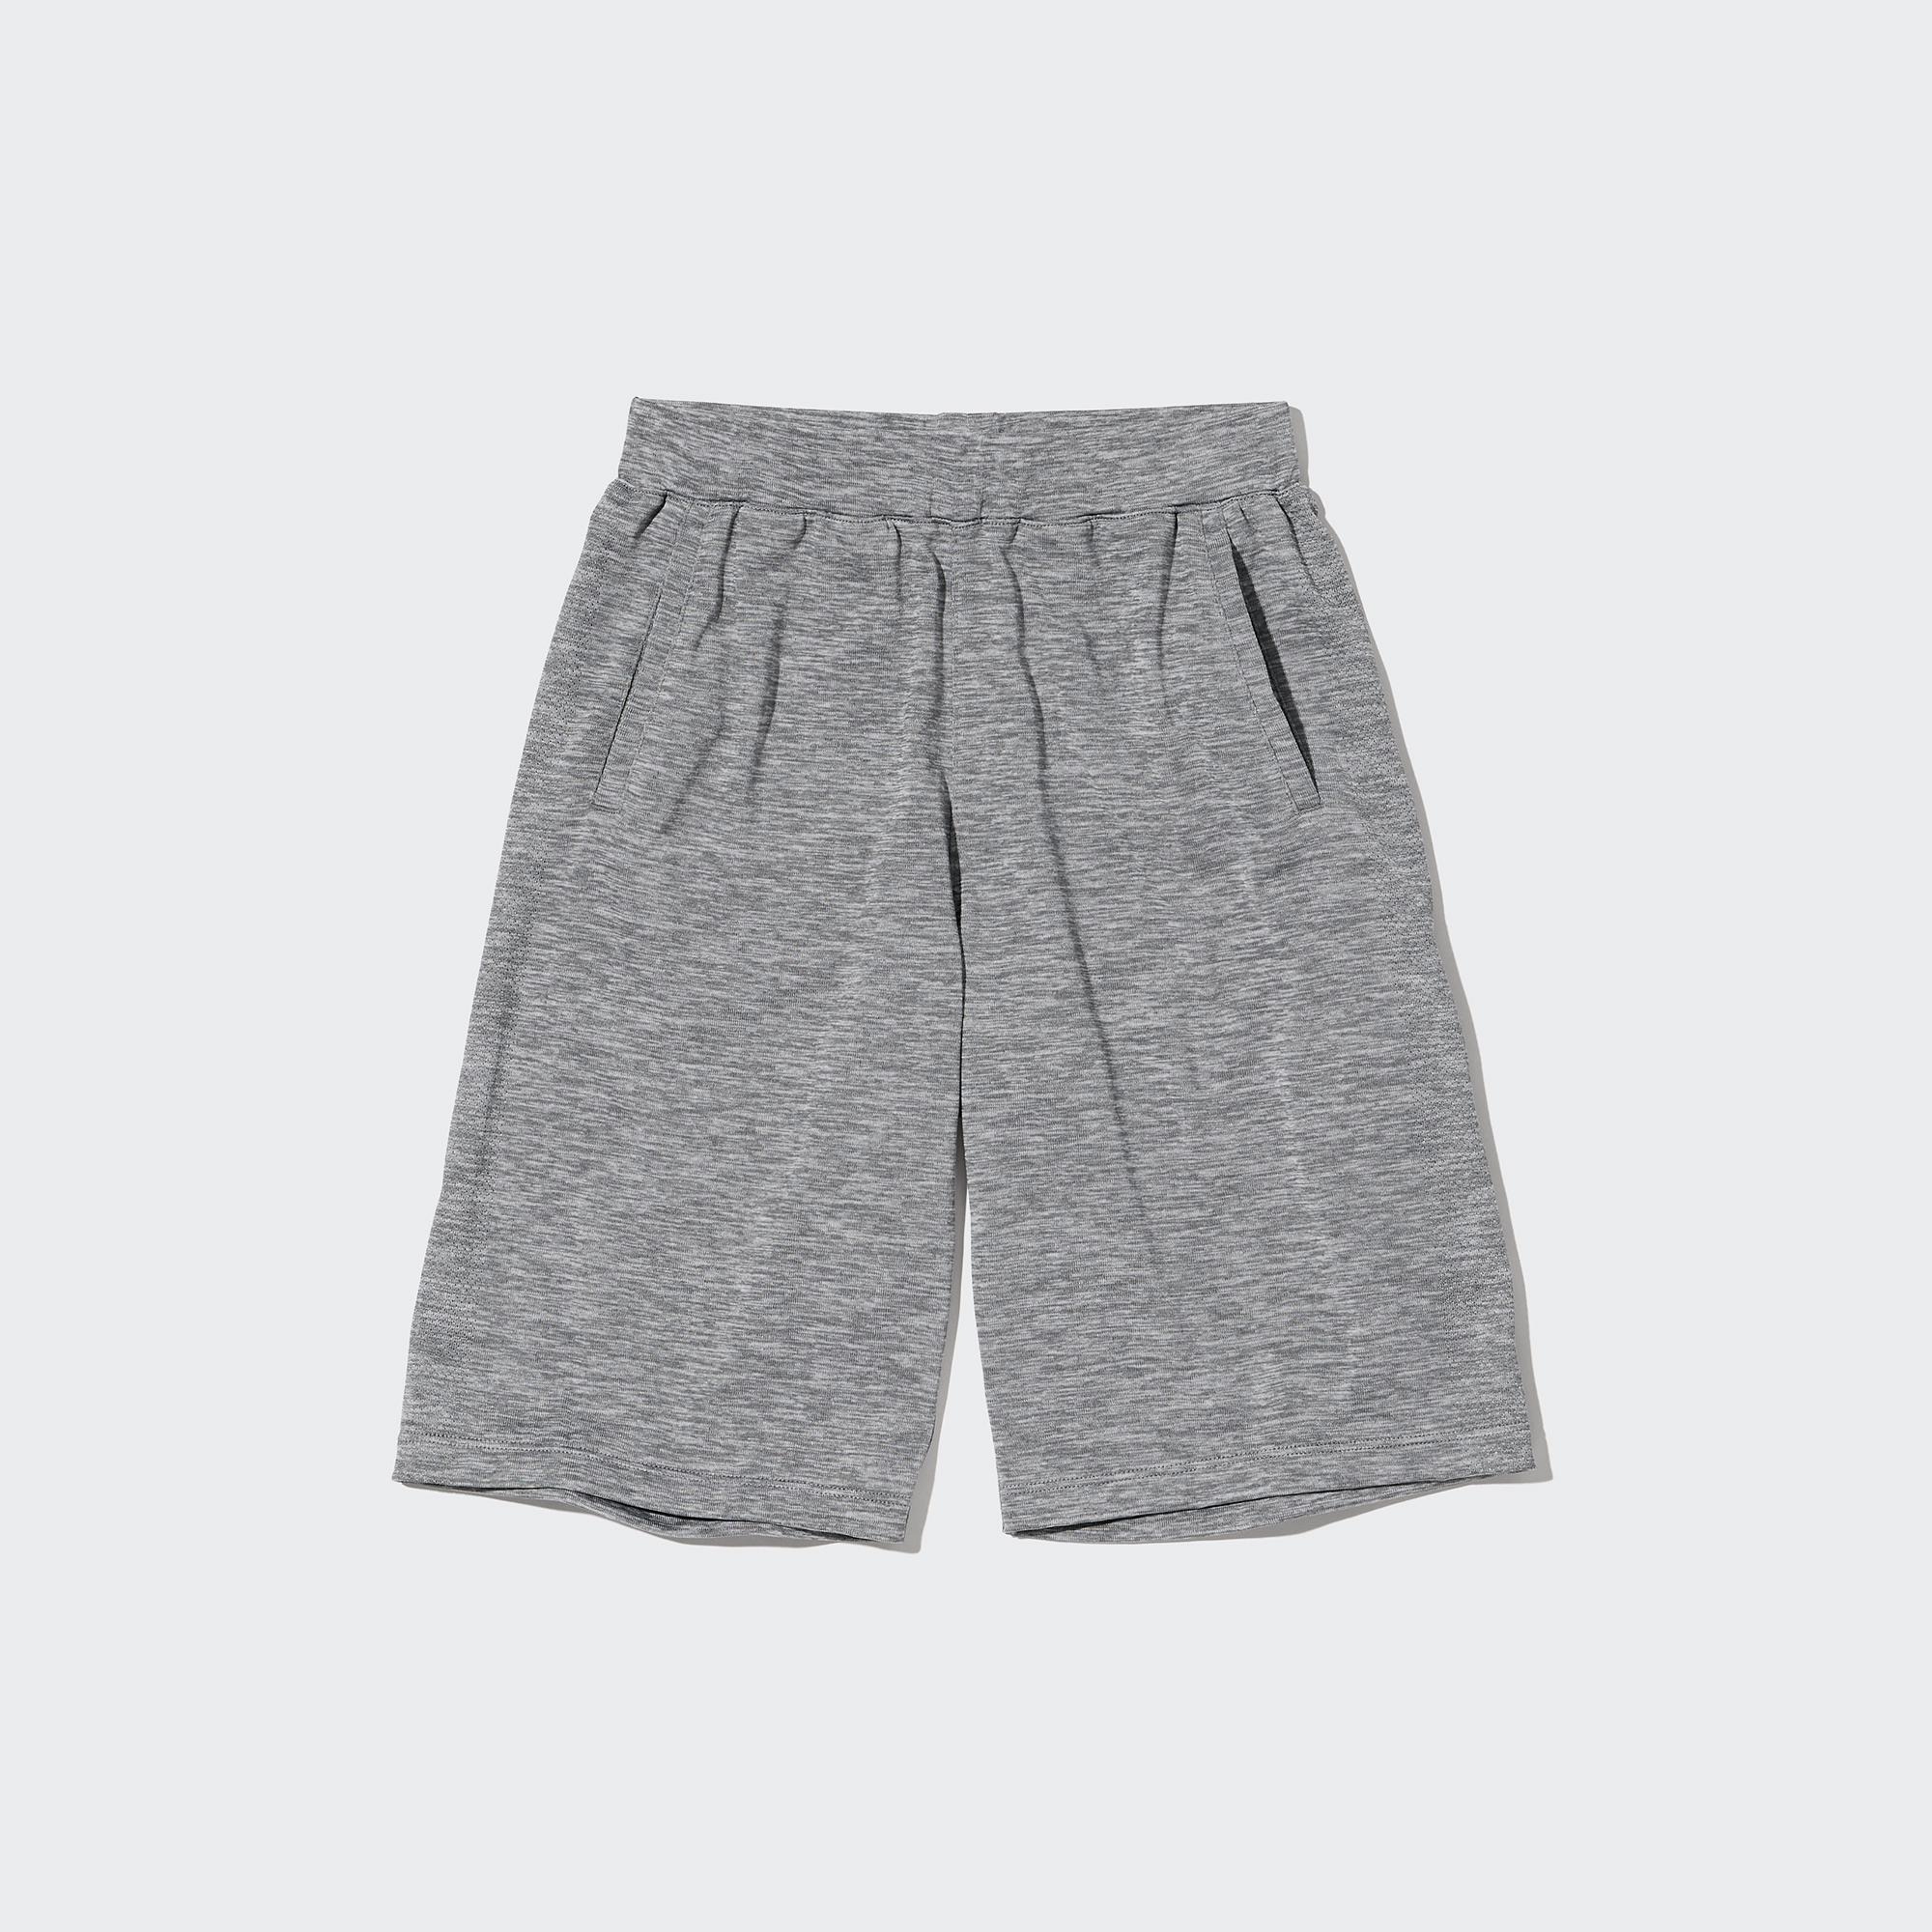 Have you tried UNIQLO DRY-EX yet? It's great for the sweaty season